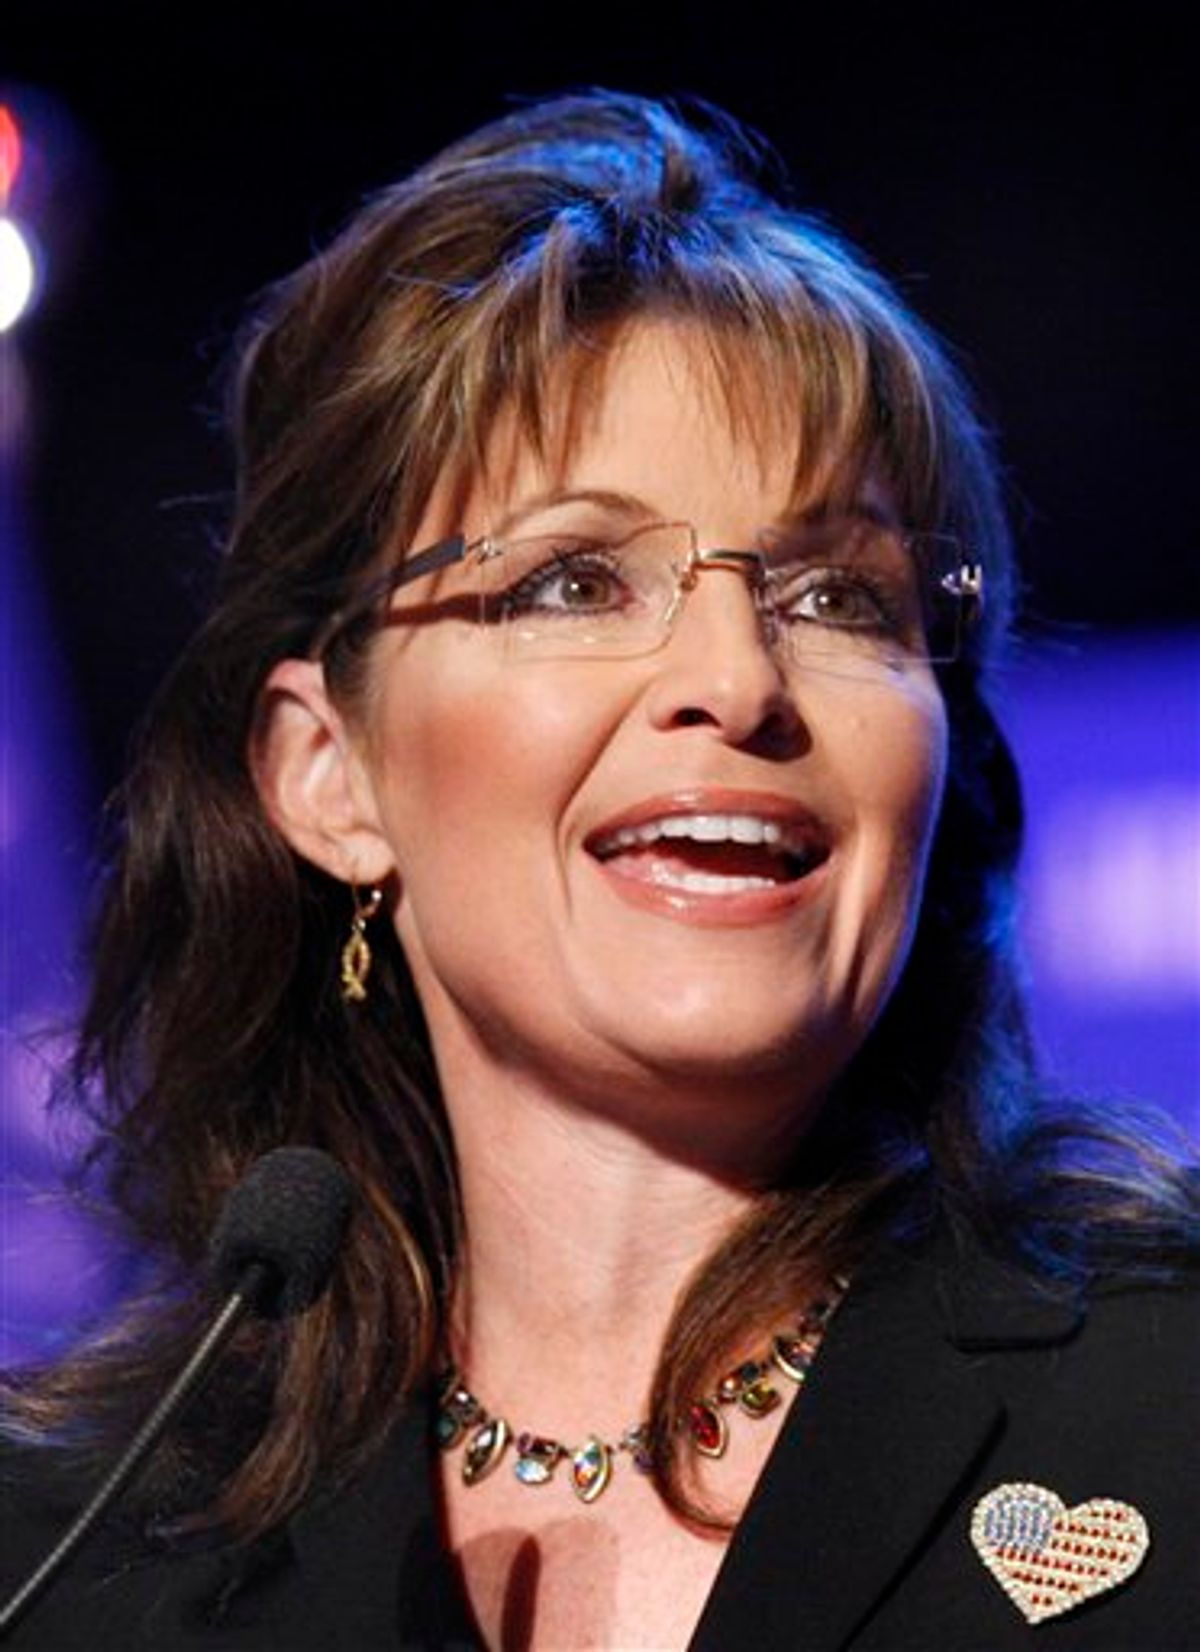 FILE - In this May 1, 2010 file photo, former Republican vice presidential candidate Sarah Palin addresses the 2nd biannual Michigan Defending the American Dream Summit in Clarkston, Mich. (AP Photo/Carlos Osorio, file) (AP)